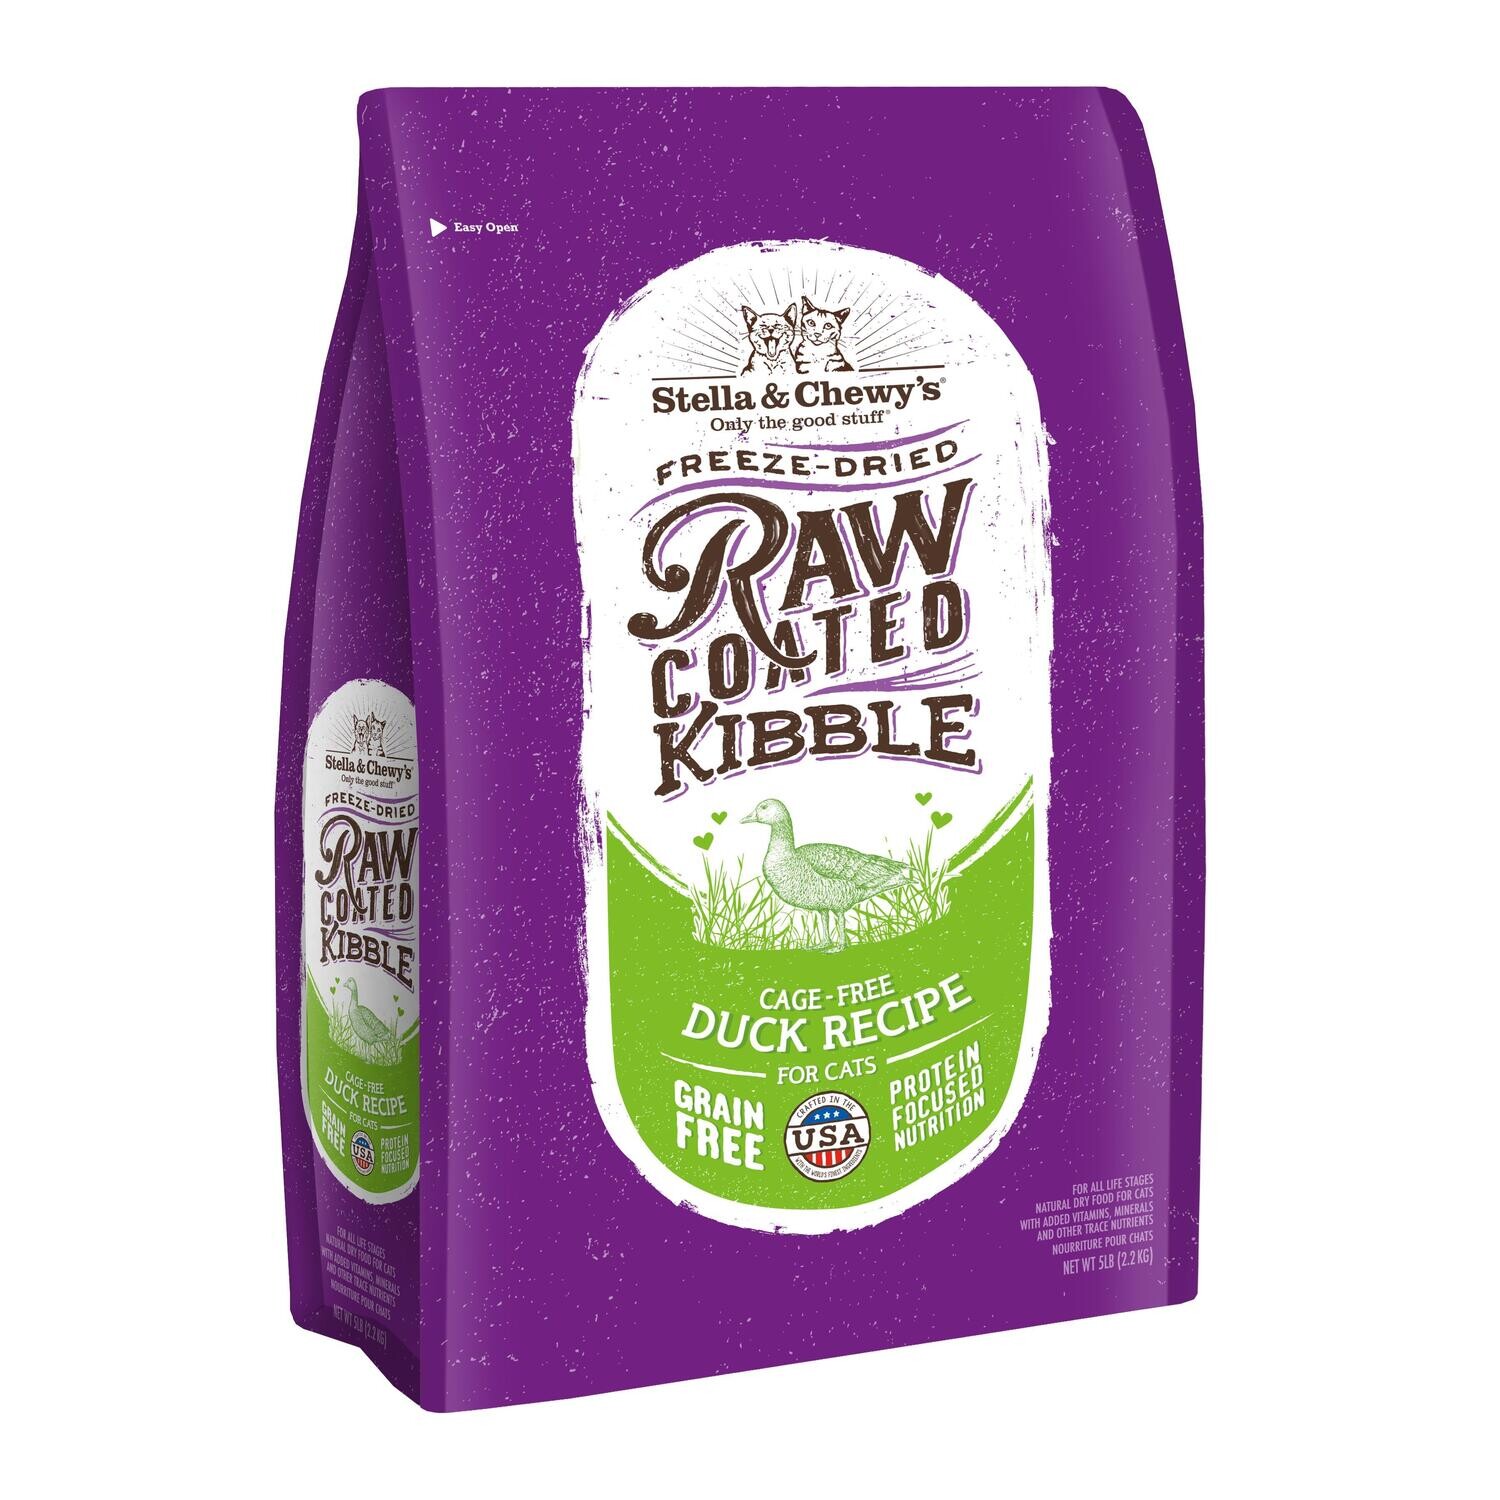 STELLA & CHEWY'S RAW COATED KIBBLE FOR CATS DUCK 5 LB